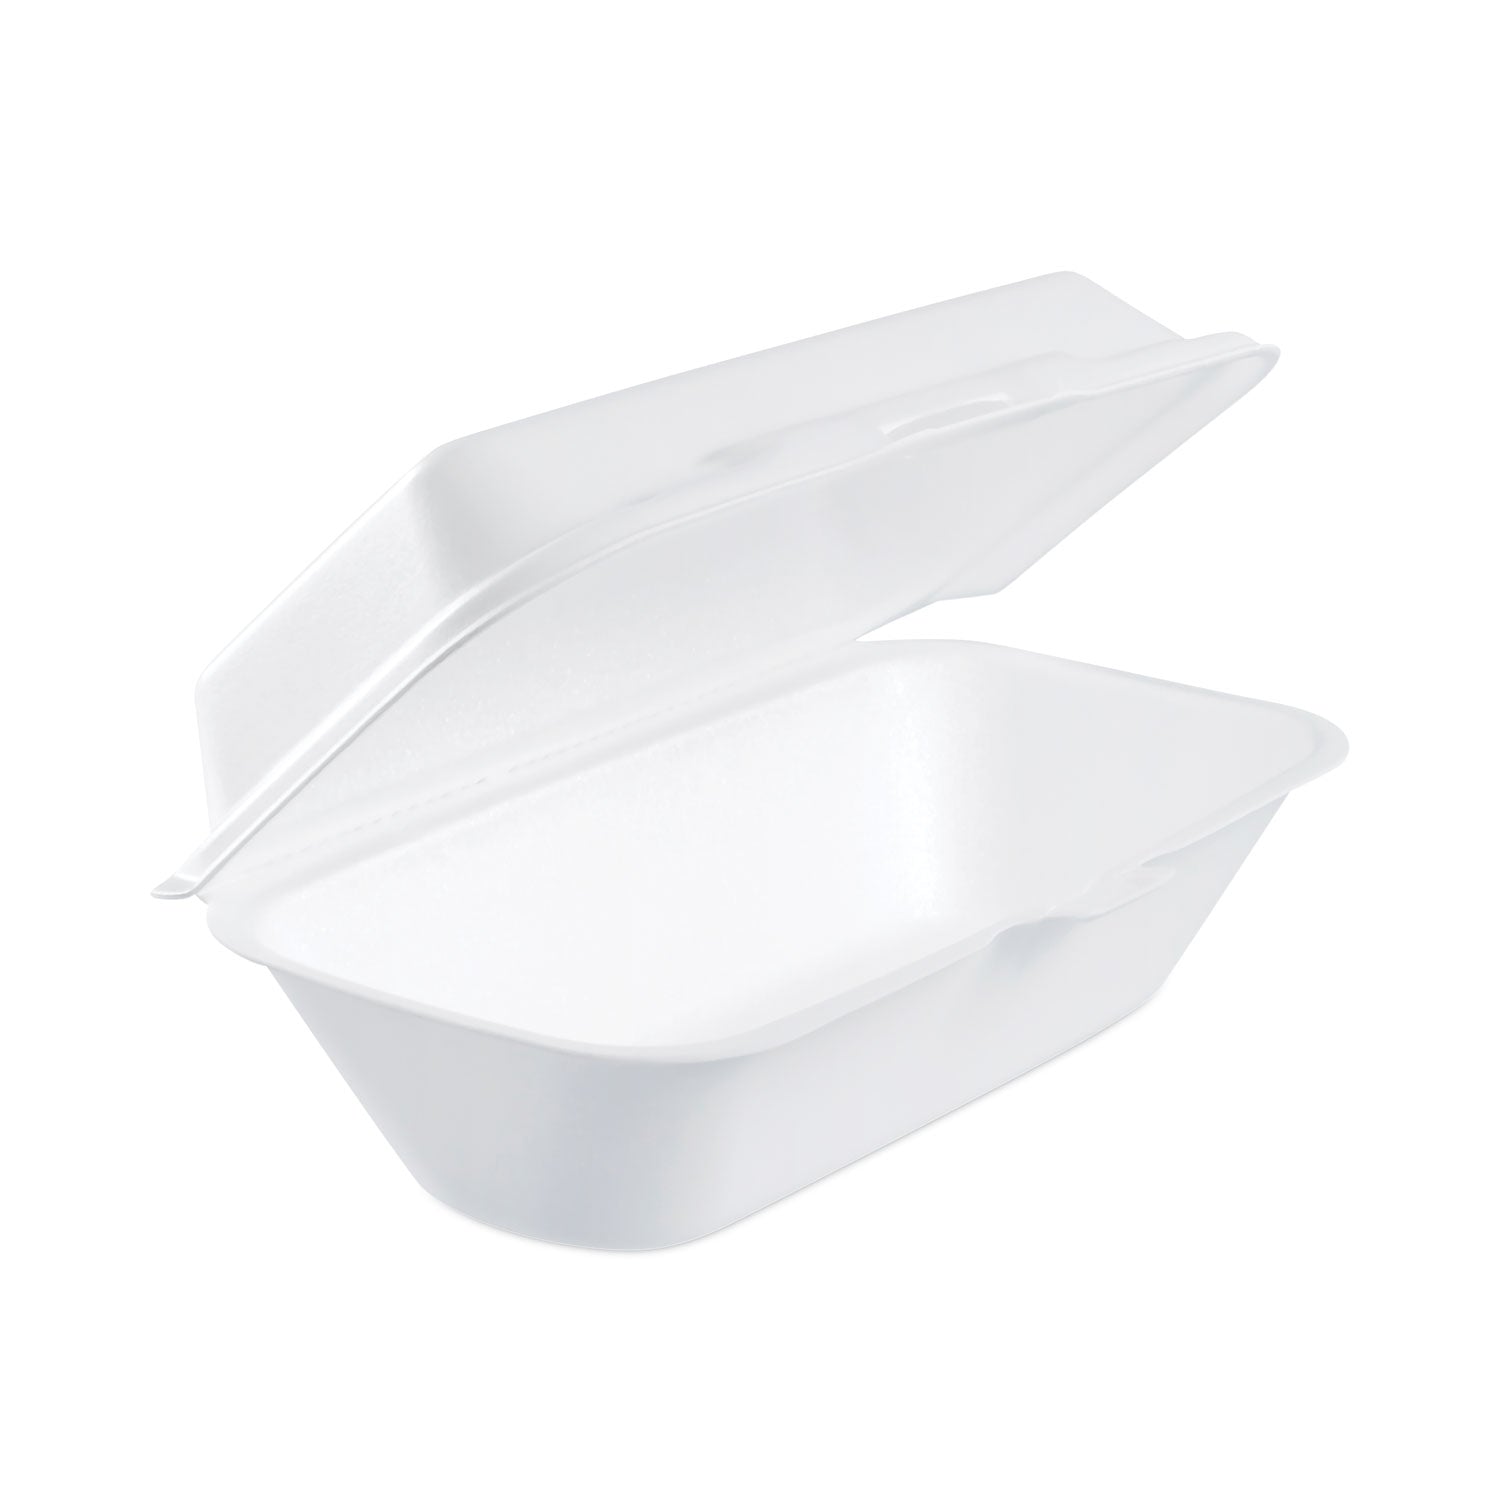 Foam Hinged Lid Container, Hoagie Container with Removable Lid, 5.3 x 9.8 x 3.3, White, 125/Bag, 4 Bags/Carton - 